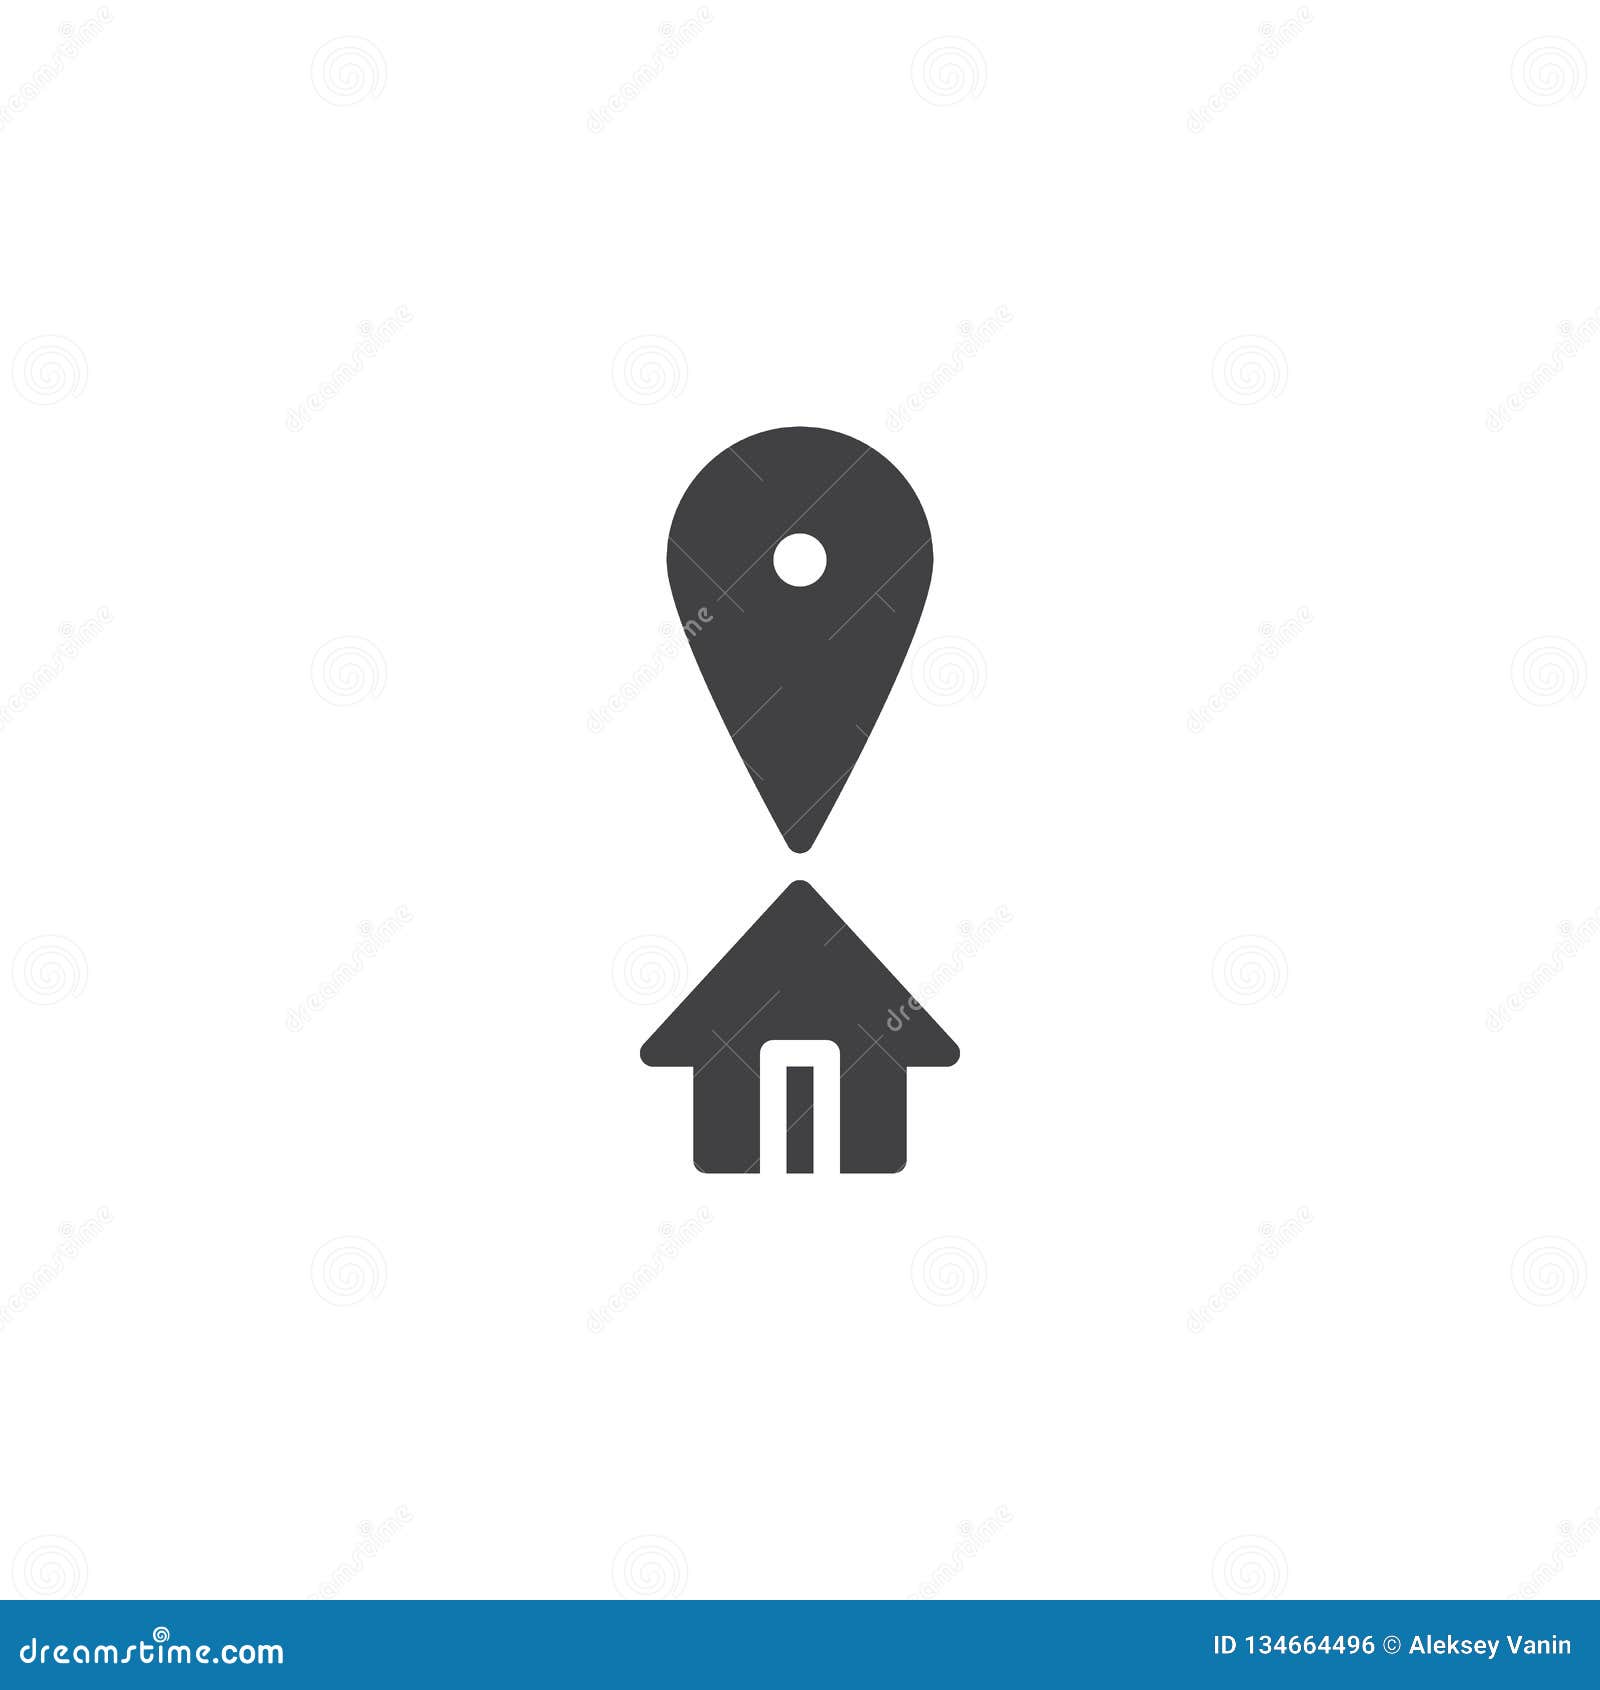 House Location Pin Vector Icon Stock Vector Illustration Of Position